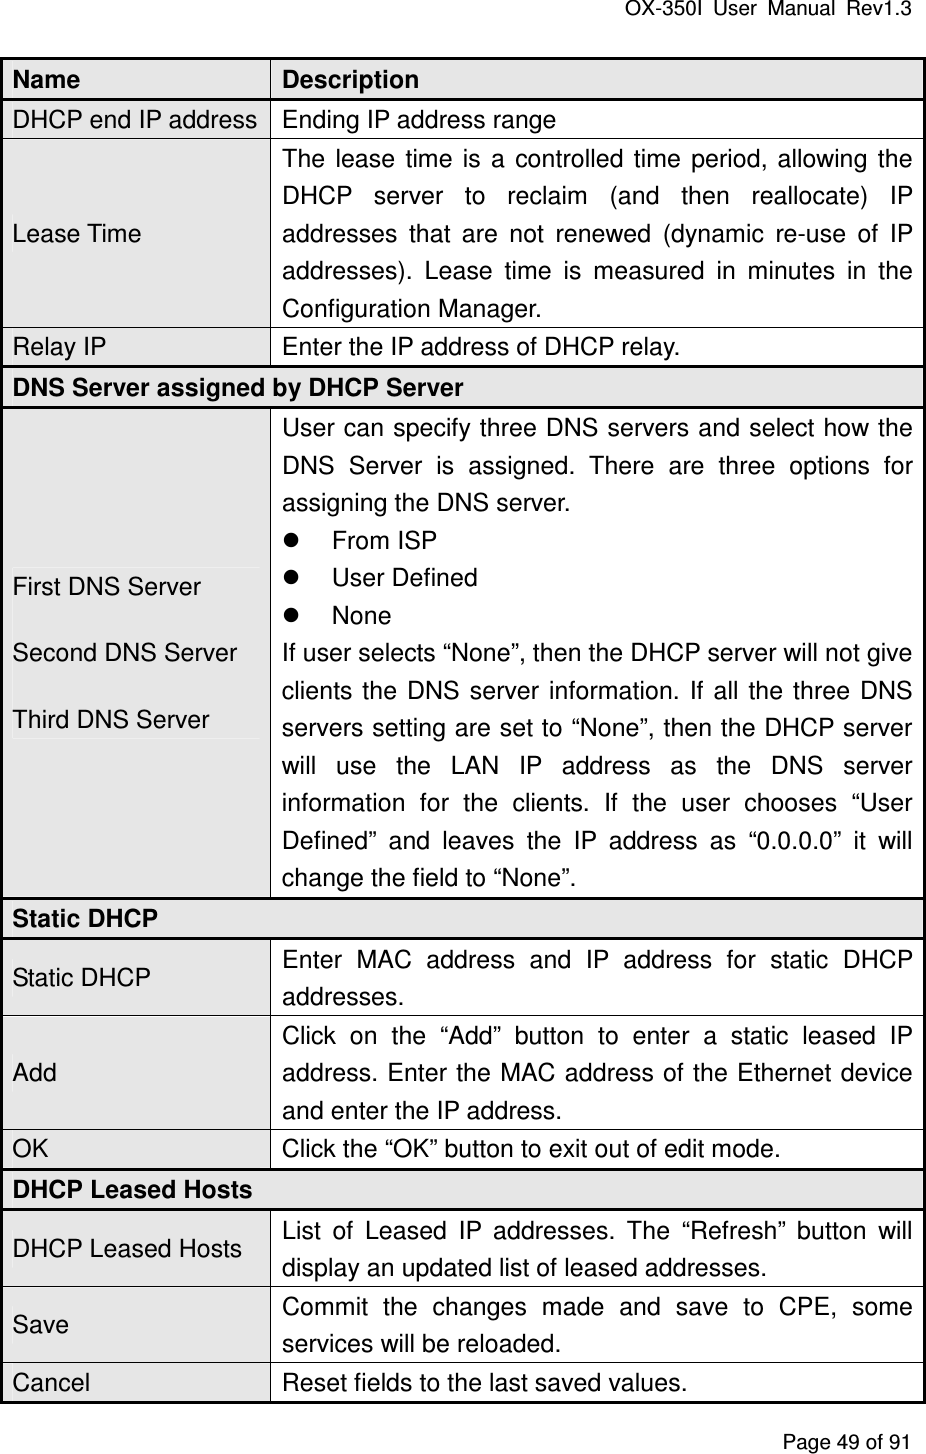 OX-350I  User  Manual  Rev1.3 Page 49 of 91 Name  Description DHCP end IP address Ending IP address range Lease Time The  lease  time  is  a  controlled  time  period,  allowing  the DHCP  server  to  reclaim  (and  then  reallocate)  IP addresses  that  are  not  renewed  (dynamic  re-use  of  IP addresses).  Lease  time  is  measured  in  minutes  in  the Configuration Manager. Relay IP  Enter the IP address of DHCP relay. DNS Server assigned by DHCP Server First DNS Server Second DNS Server Third DNS Server User can specify three DNS servers and select how the DNS  Server  is  assigned.  There  are  three  options  for assigning the DNS server.   From ISP   User Defined   None If user selects “None”, then the DHCP server will not give clients the  DNS  server  information.  If  all  the  three  DNS servers setting are set to “None”, then the DHCP server will  use  the  LAN  IP  address  as  the  DNS  server information  for  the  clients.  If  the  user  chooses  “User Defined”  and  leaves  the  IP  address  as  “0.0.0.0”  it  will change the field to “None”. Static DHCP Static DHCP  Enter  MAC  address  and  IP  address  for  static  DHCP addresses. Add Click  on  the  “Add”  button  to  enter  a  static  leased  IP address. Enter the MAC address of the Ethernet device and enter the IP address. OK  Click the “OK” button to exit out of edit mode. DHCP Leased Hosts DHCP Leased Hosts  List  of  Leased  IP  addresses.  The  “Refresh”  button  will display an updated list of leased addresses. Save  Commit  the  changes  made  and  save  to  CPE,  some services will be reloaded. Cancel  Reset fields to the last saved values. 